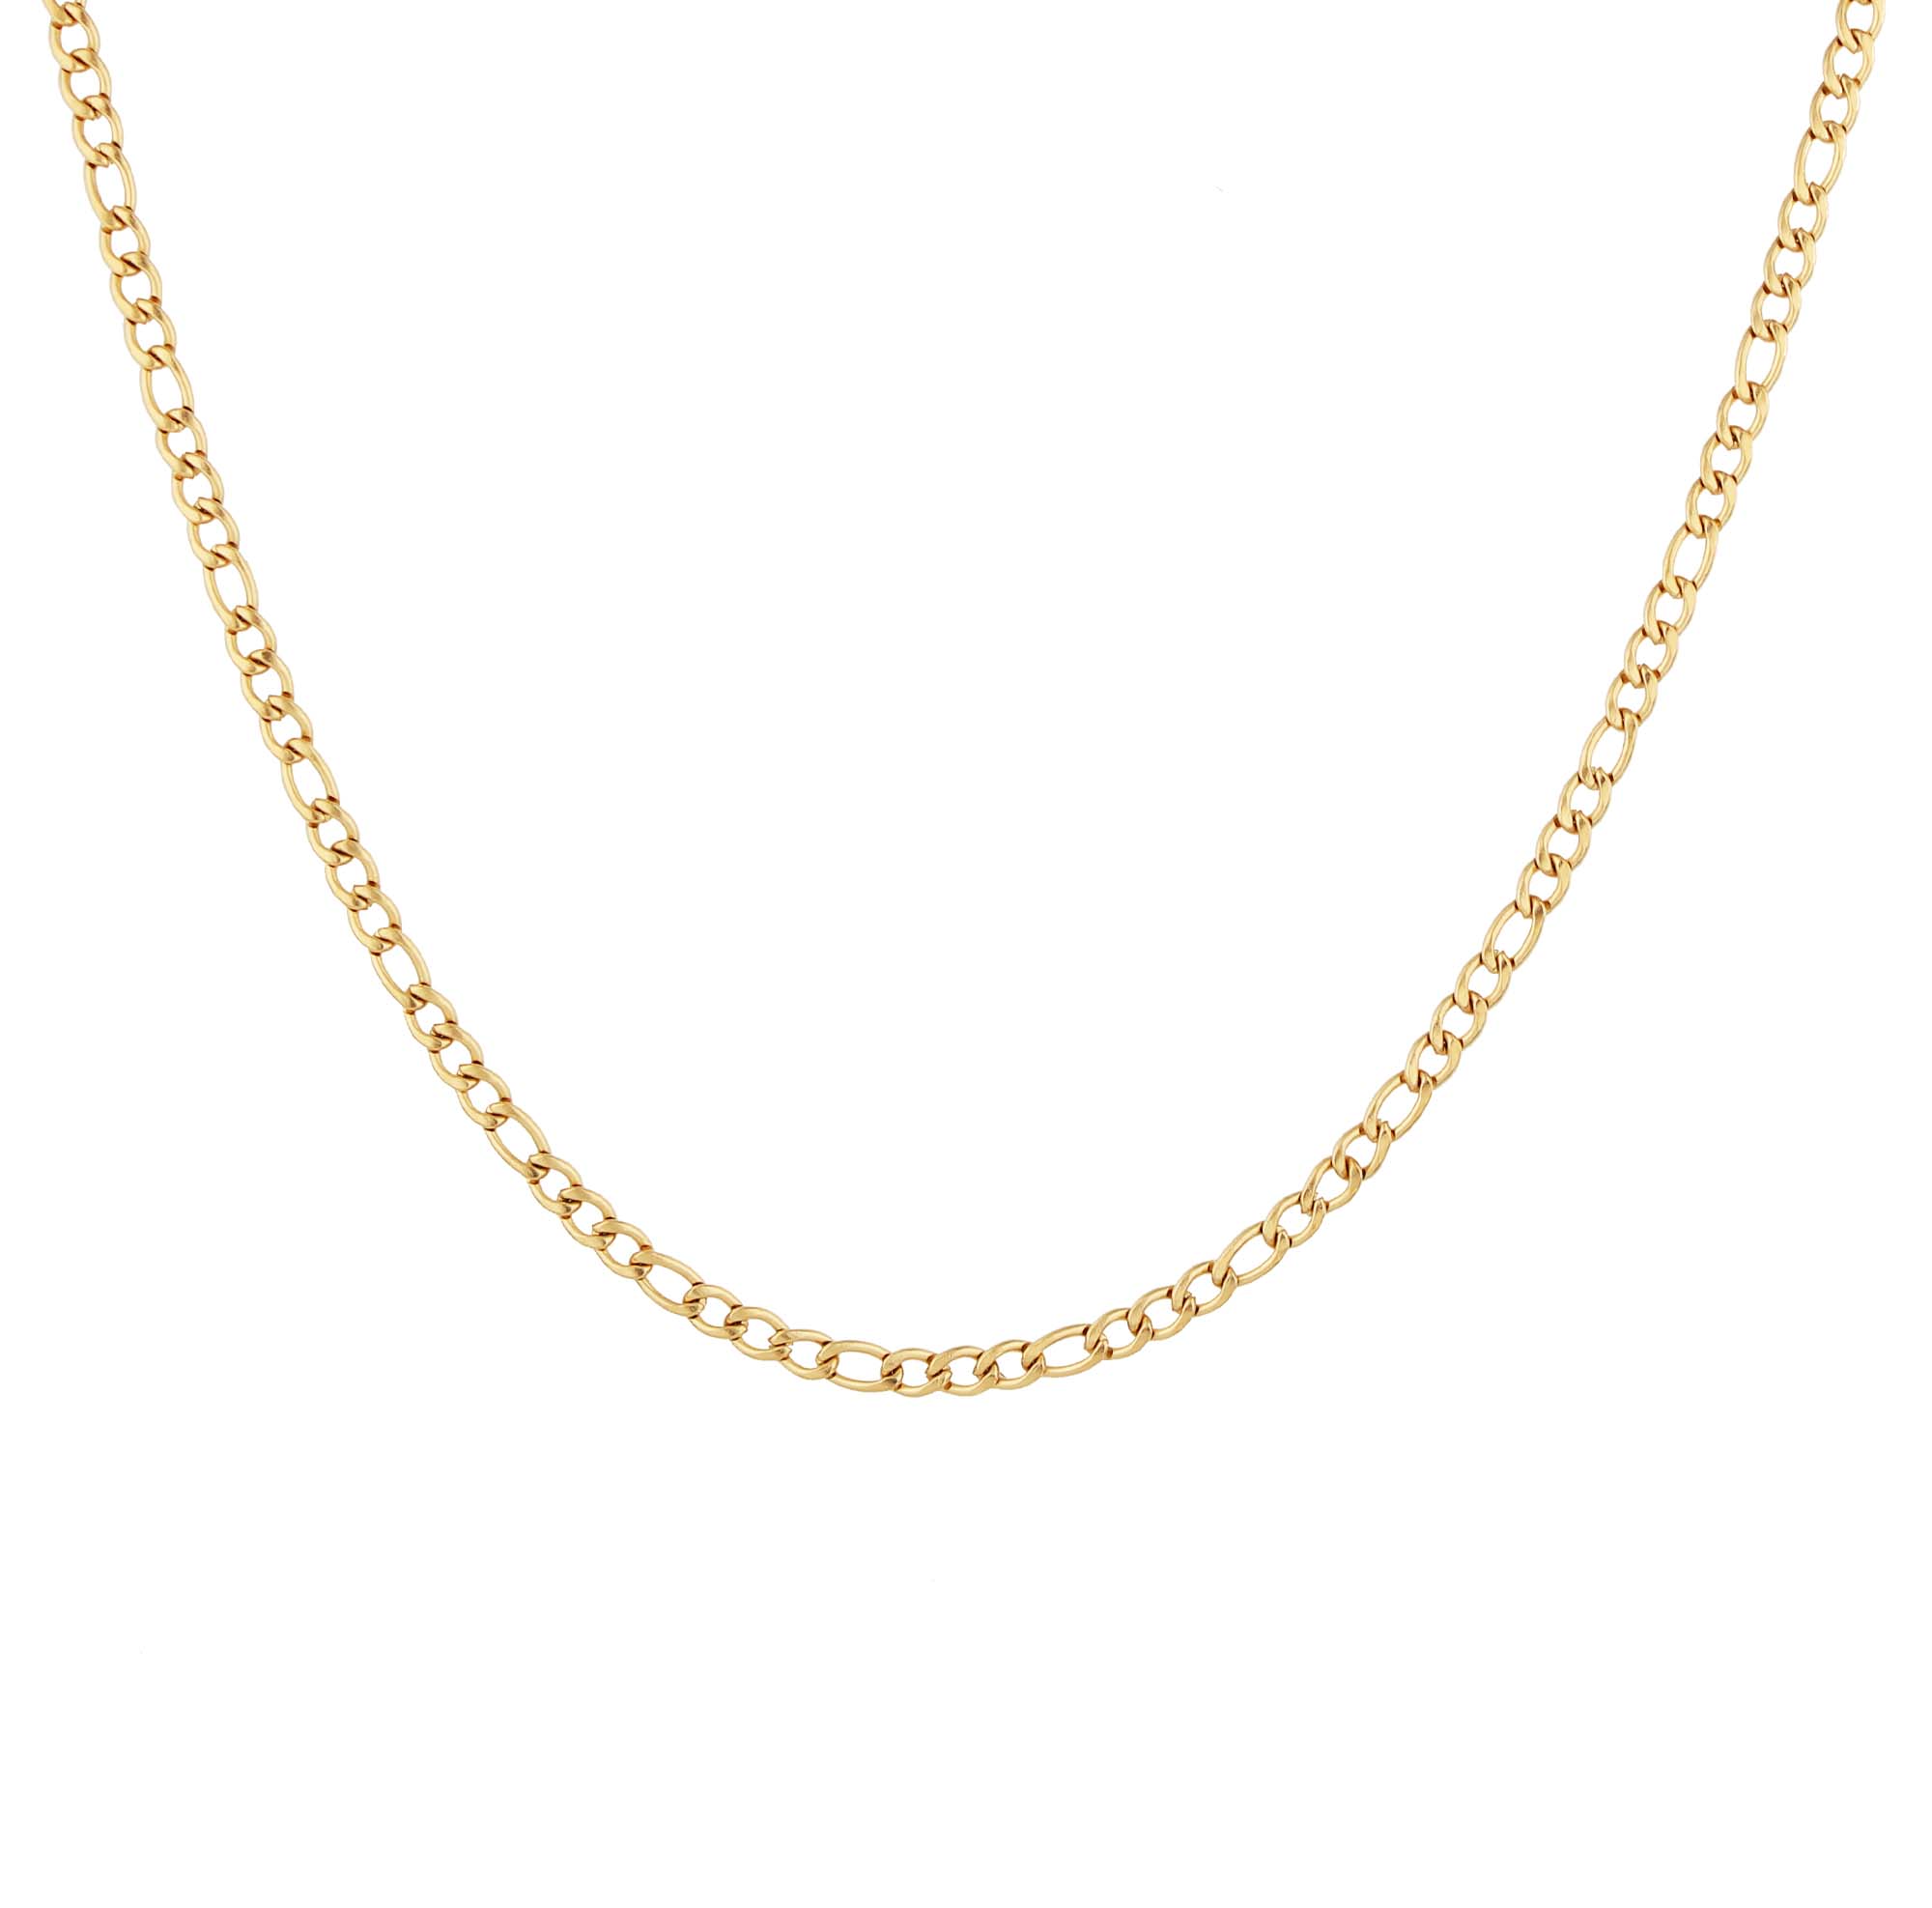 Valencia women's necklace by Five Jwlry, crafted from a 4mm figaro chain in gold-colored, water-resistant 316L stainless steel. Available in size 40cm with a 5cm extension. Hypoallergenic with a 2-year warranty.